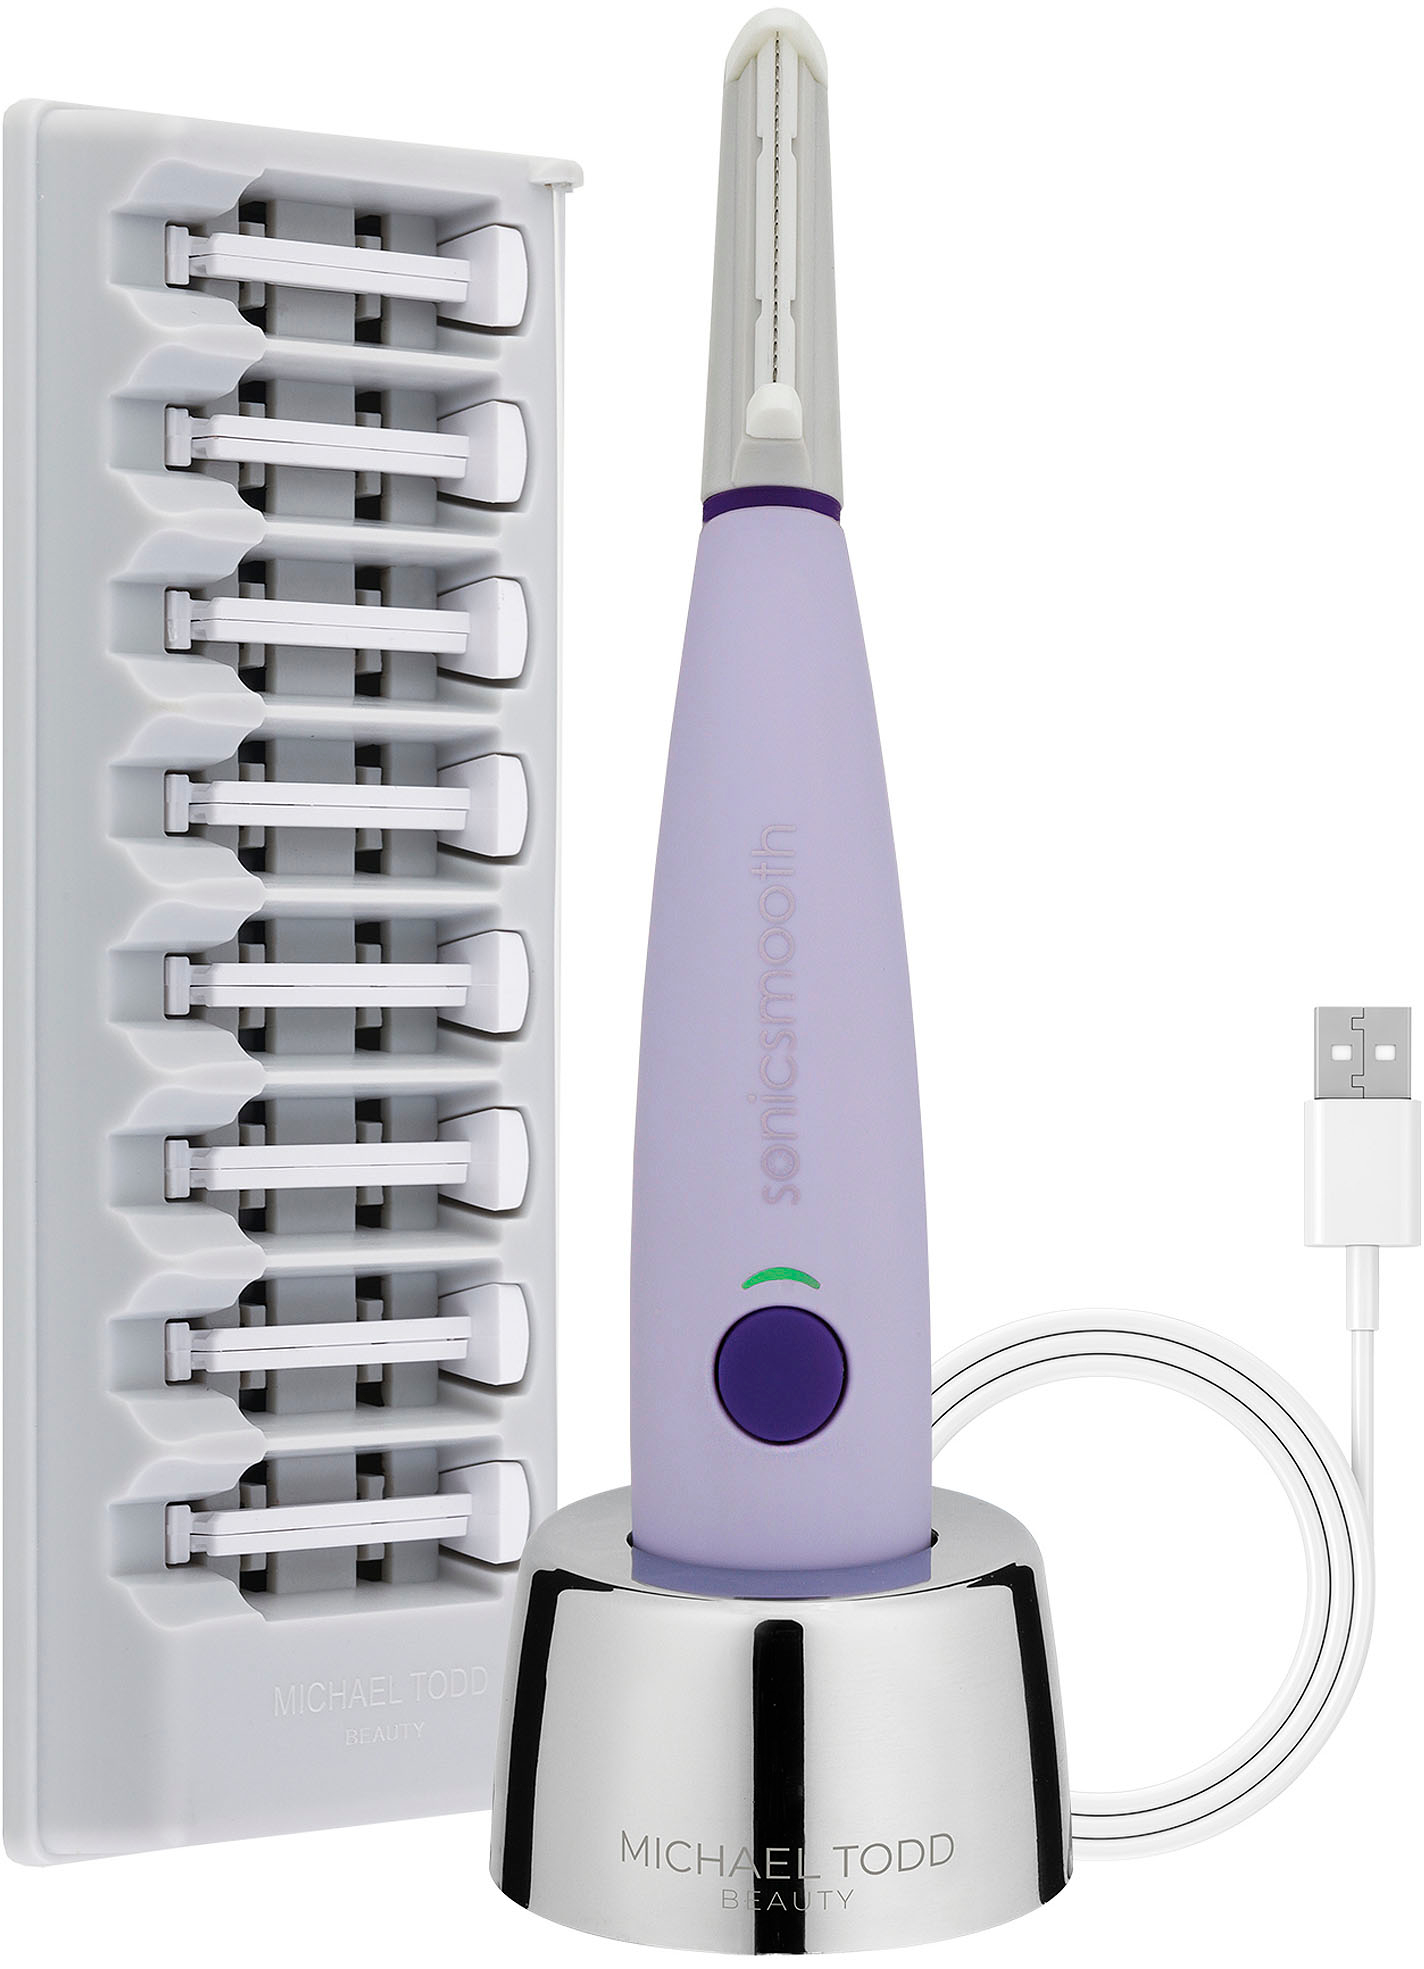 Angle View: MICHAEL TODD BEAUTY - Sonicsmooth Dermaplaning System - Purple